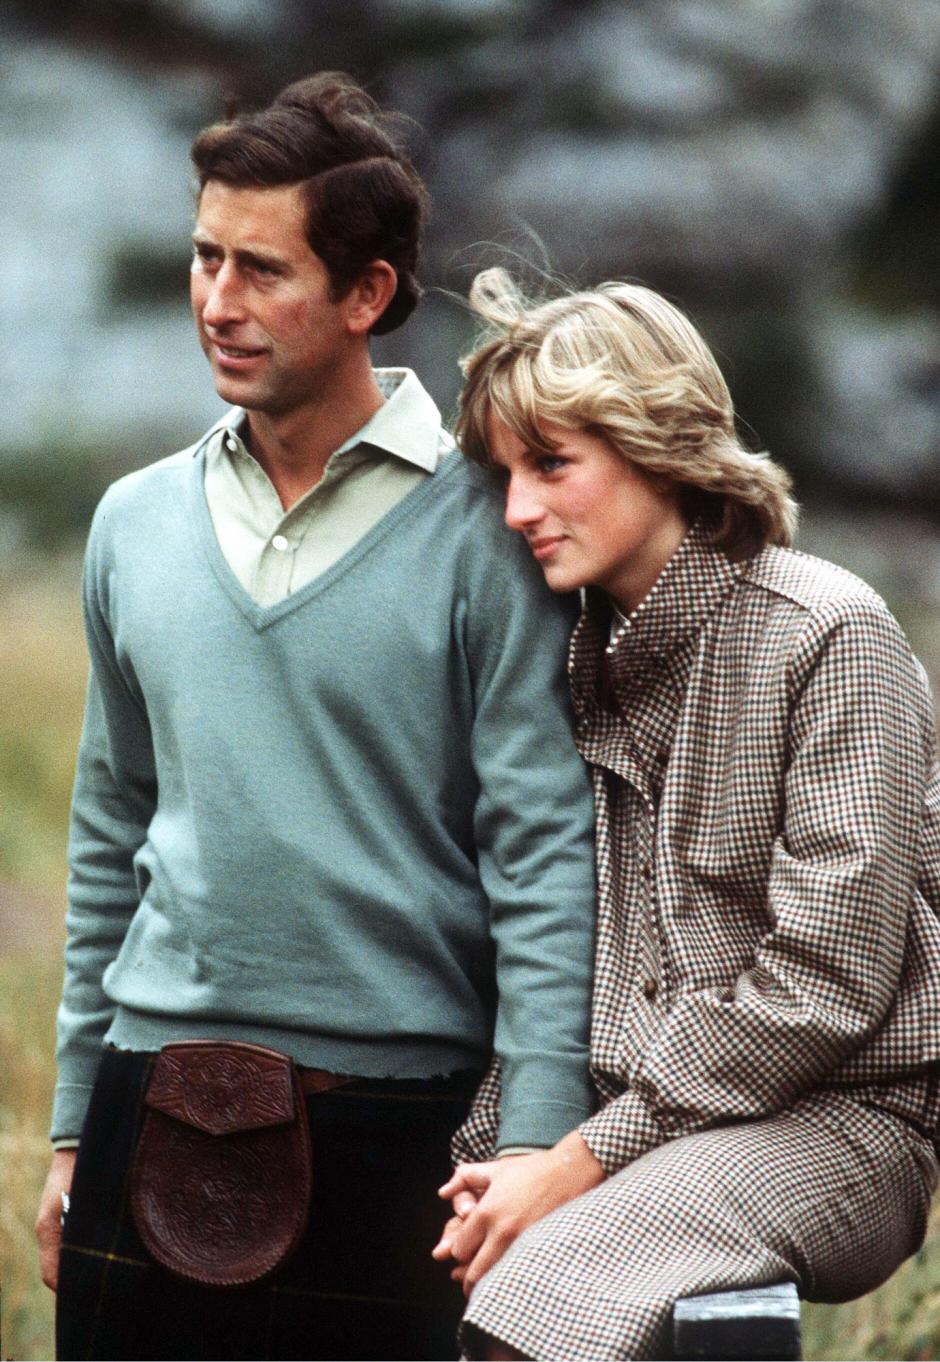 Prince Charles, Prince of Wales and Diana, Princess of Wales pose of the press on their honeymoon at Balmoral in Scotland in August 1981.